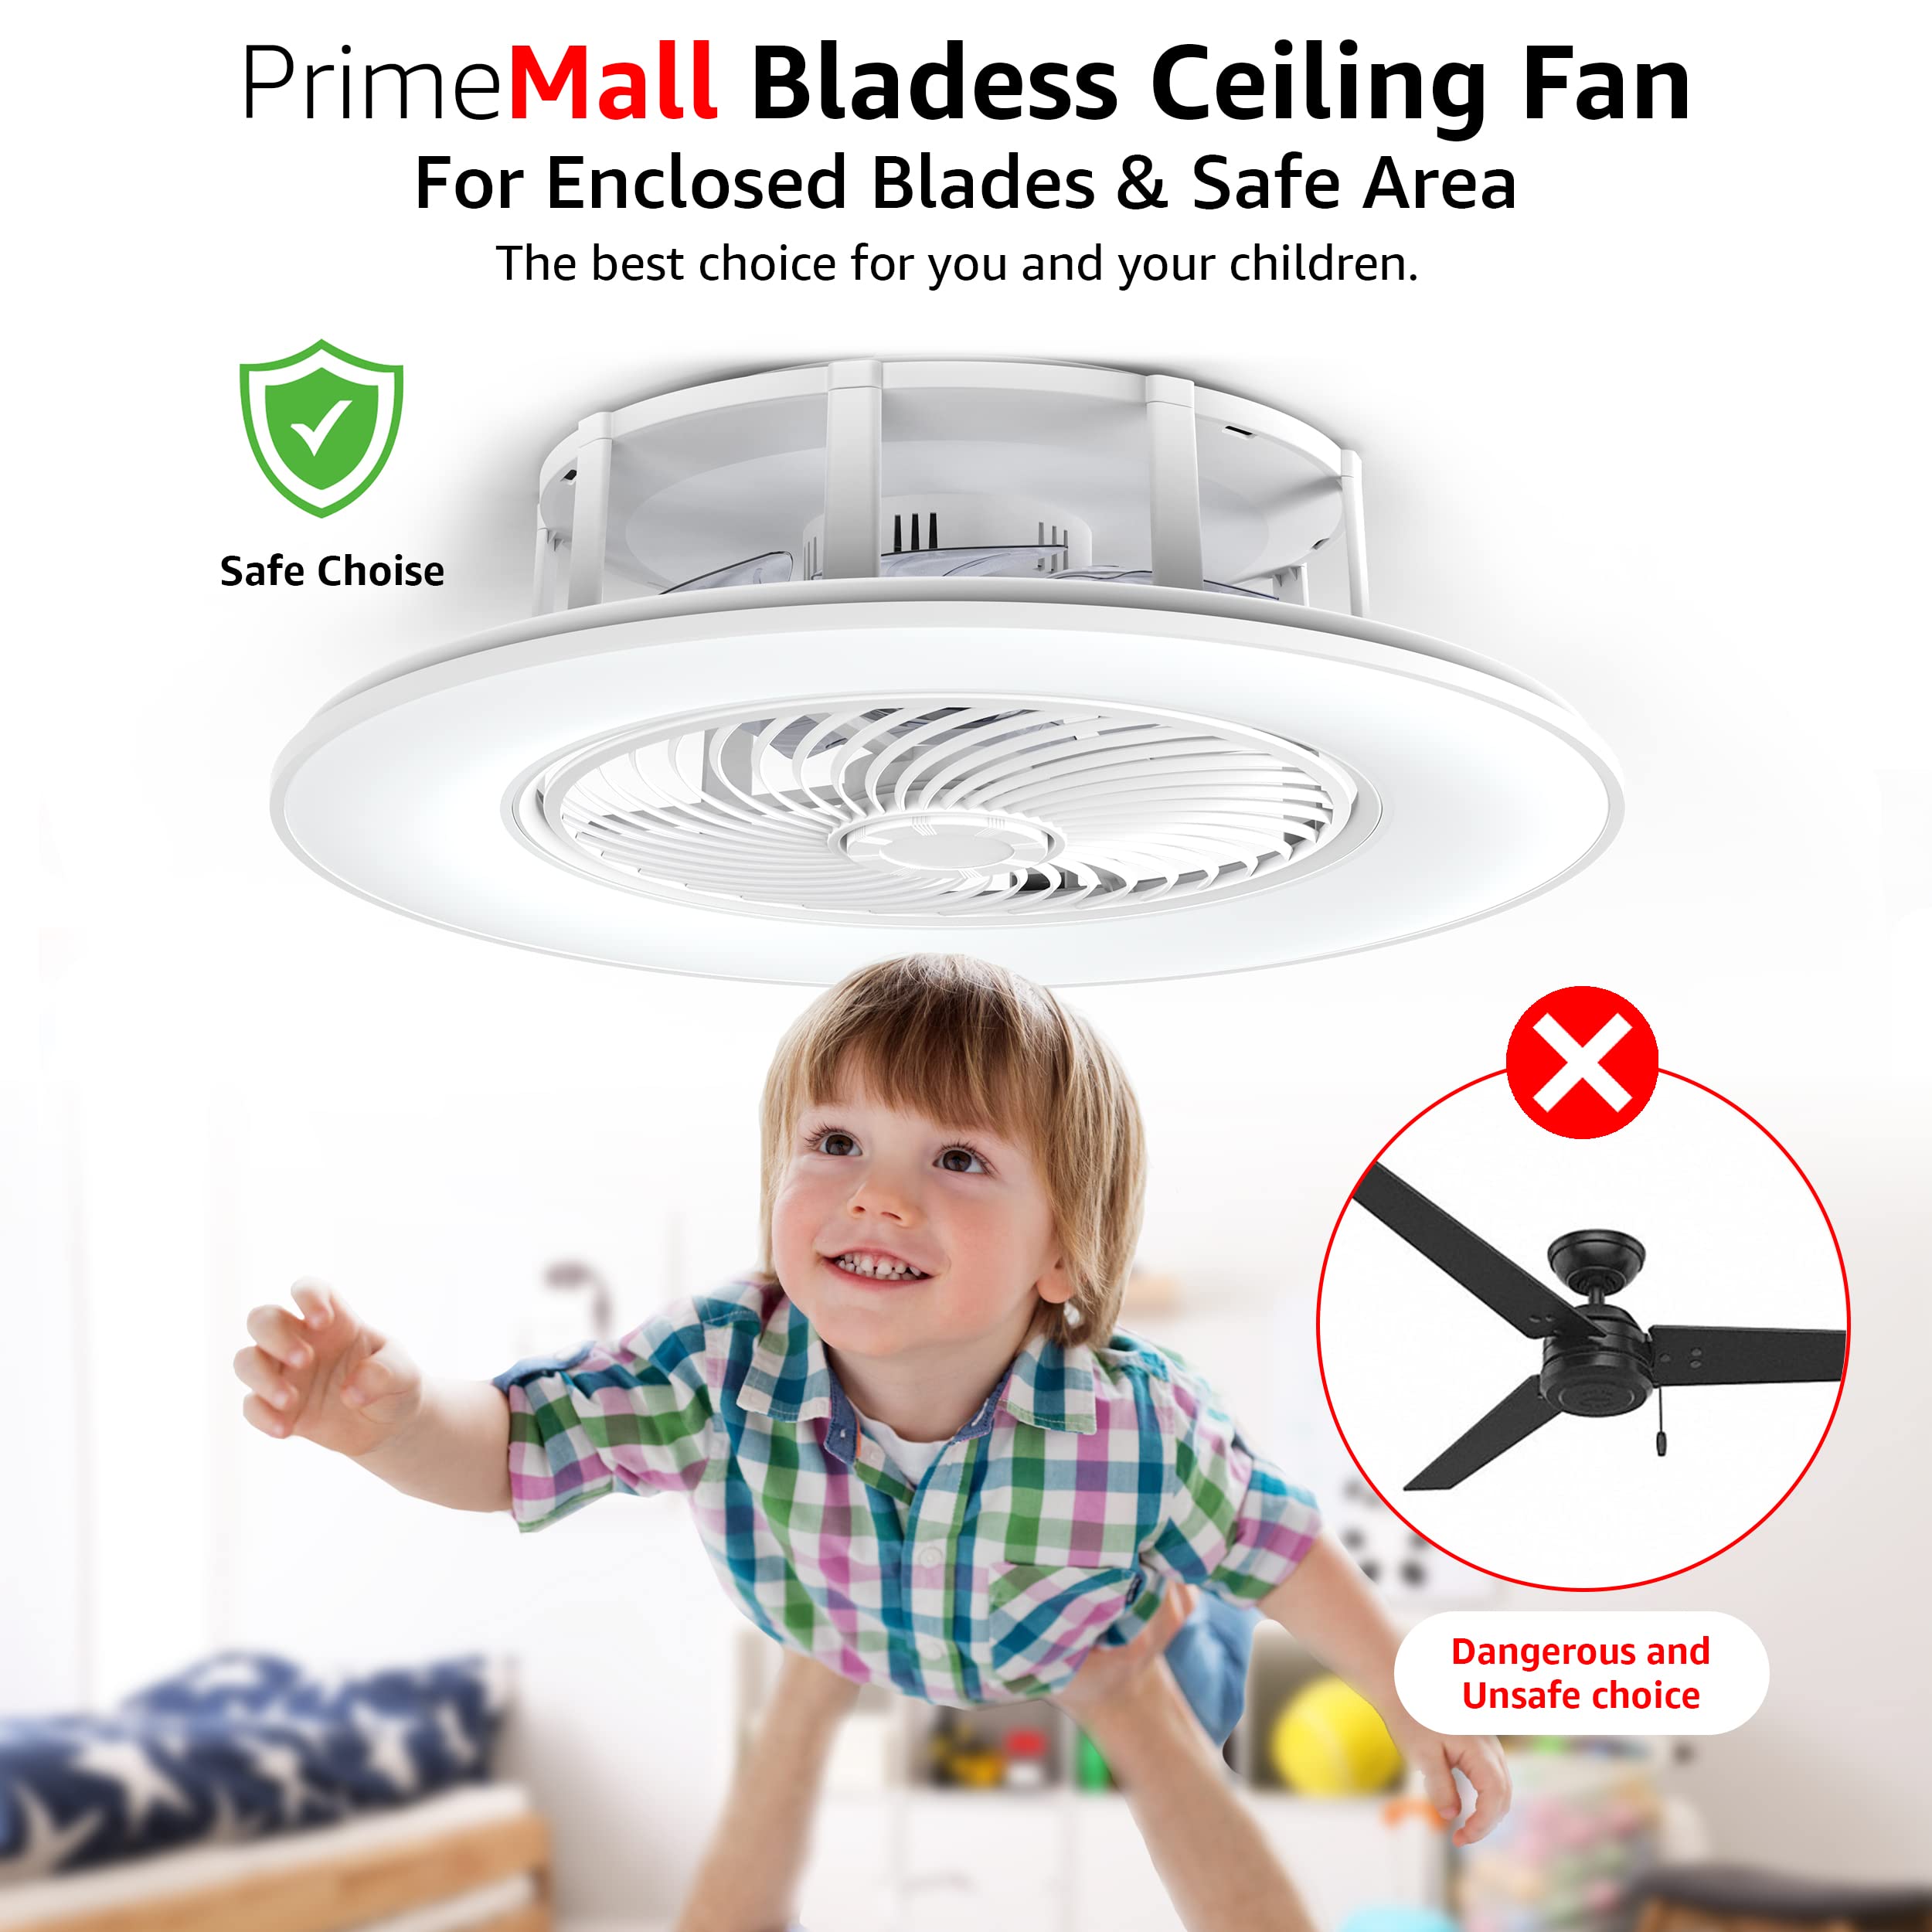 PrimeMall Bladeless Ceiling Fan with Light and Remote Control 22